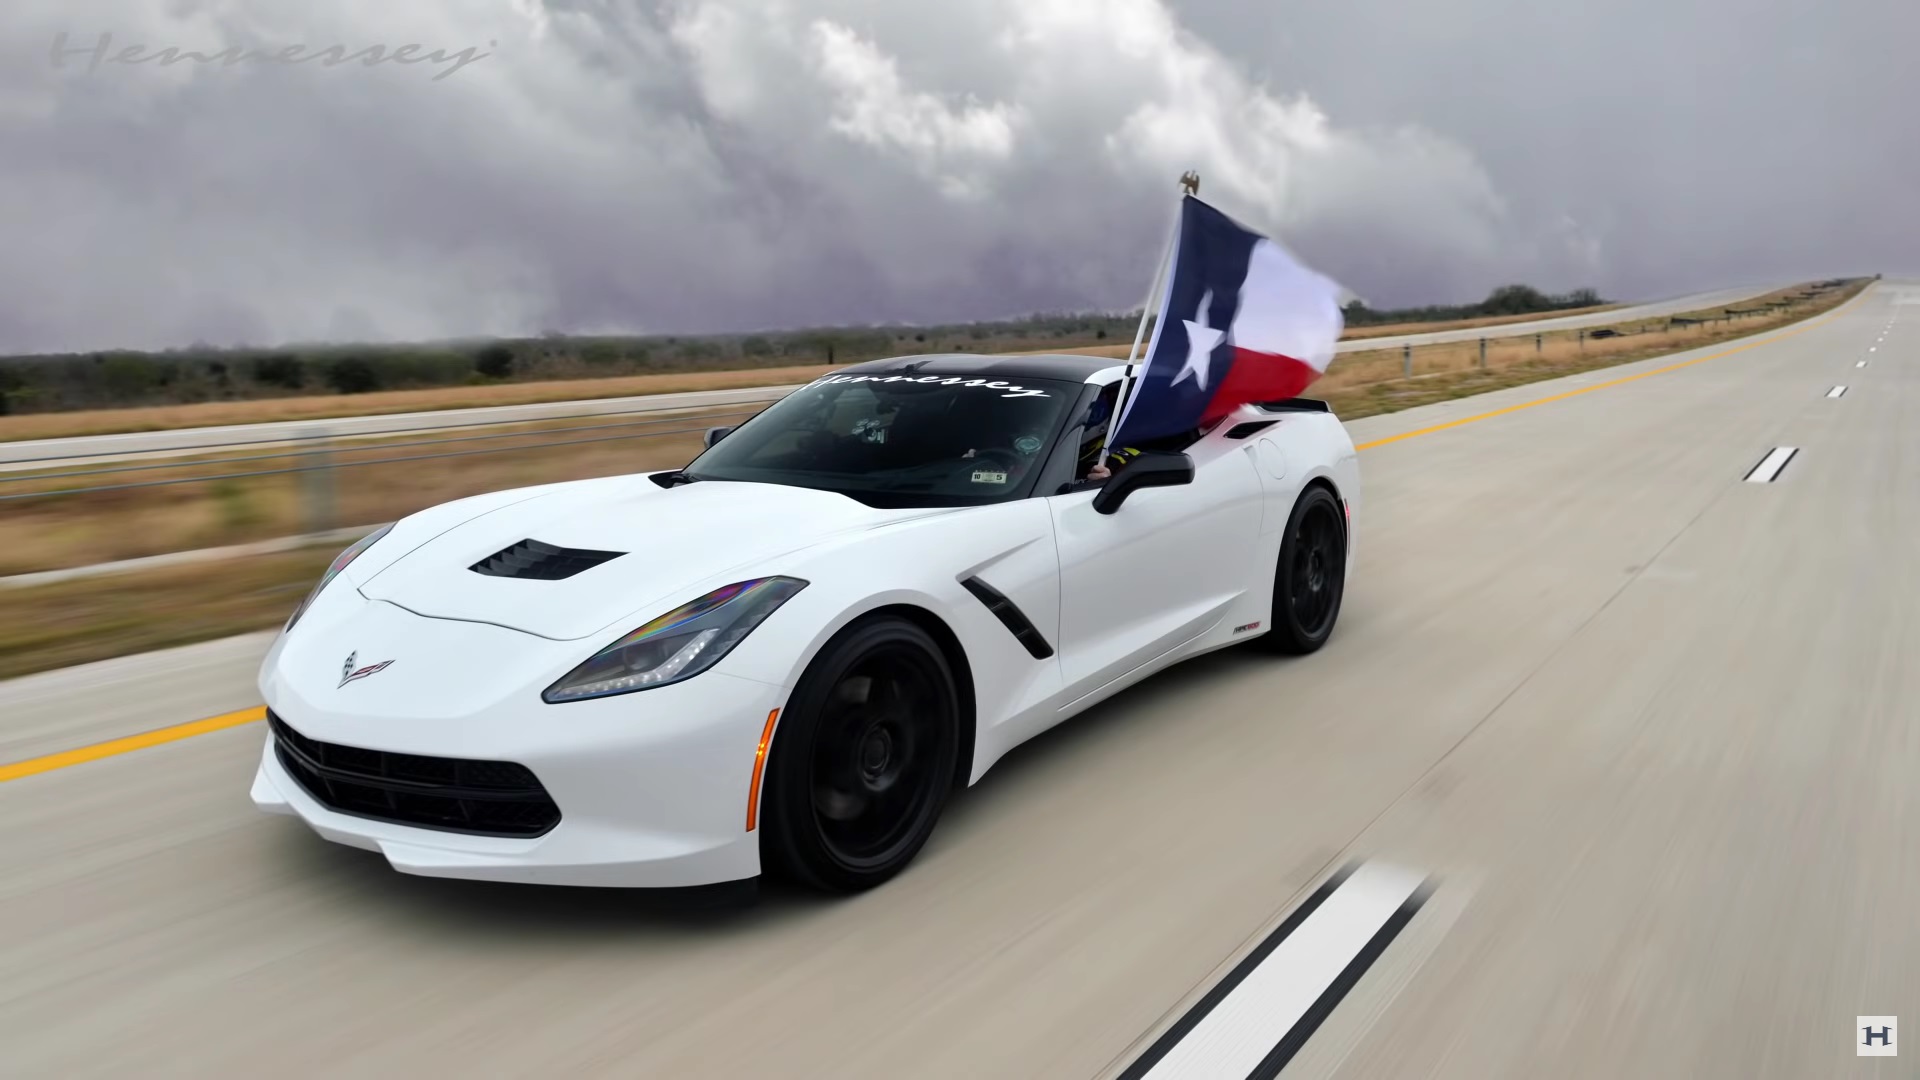 A 700 HP Hennessey C7 Breaks The 200 MPH Barrier For The First Time